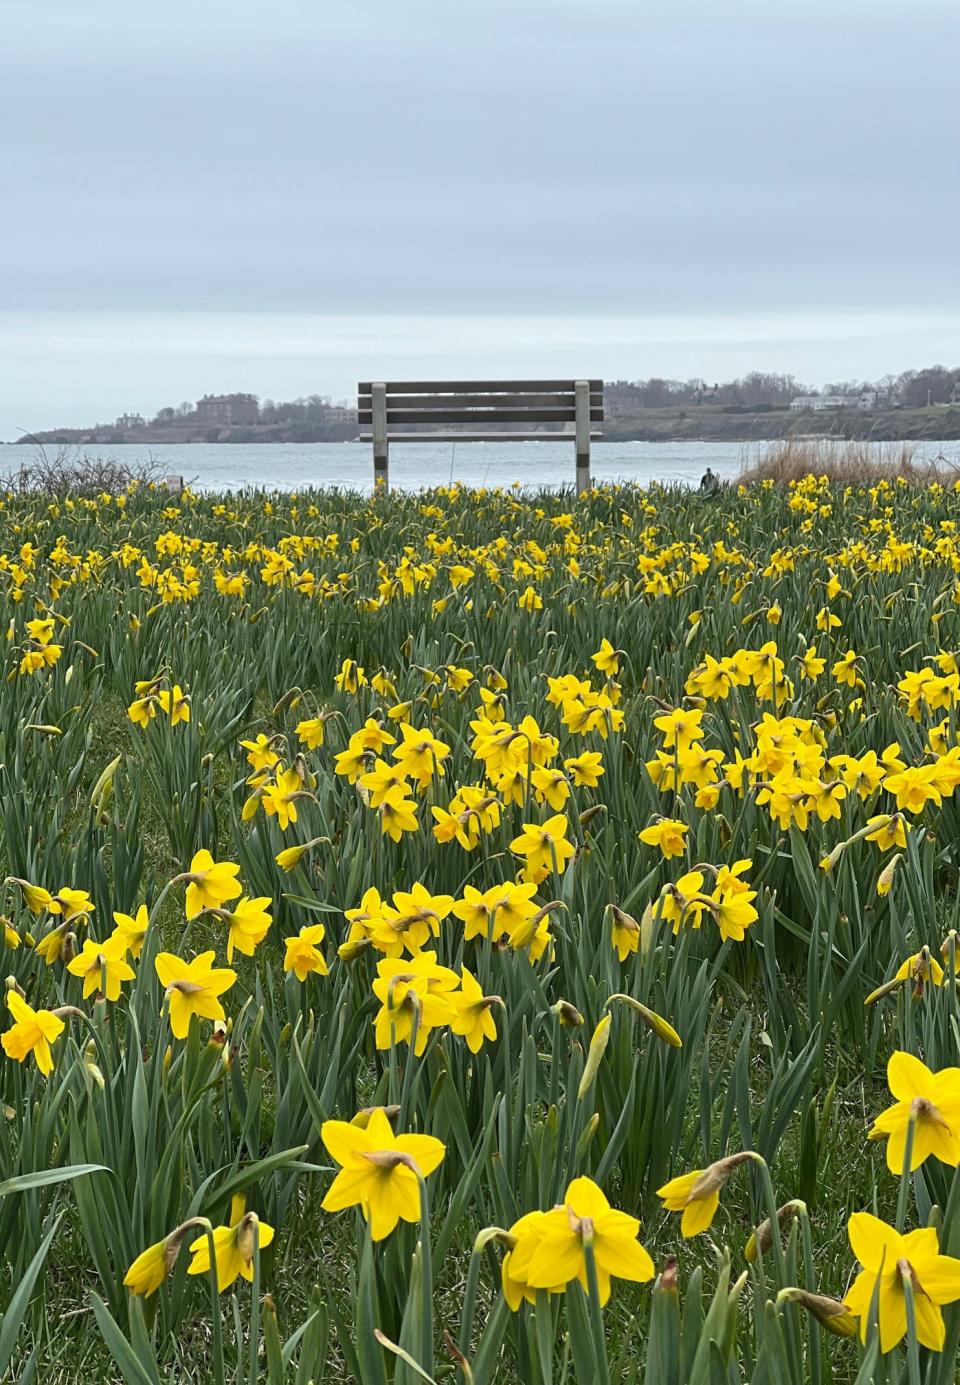 Some of the more than 1 million daffodils planted around Newport.